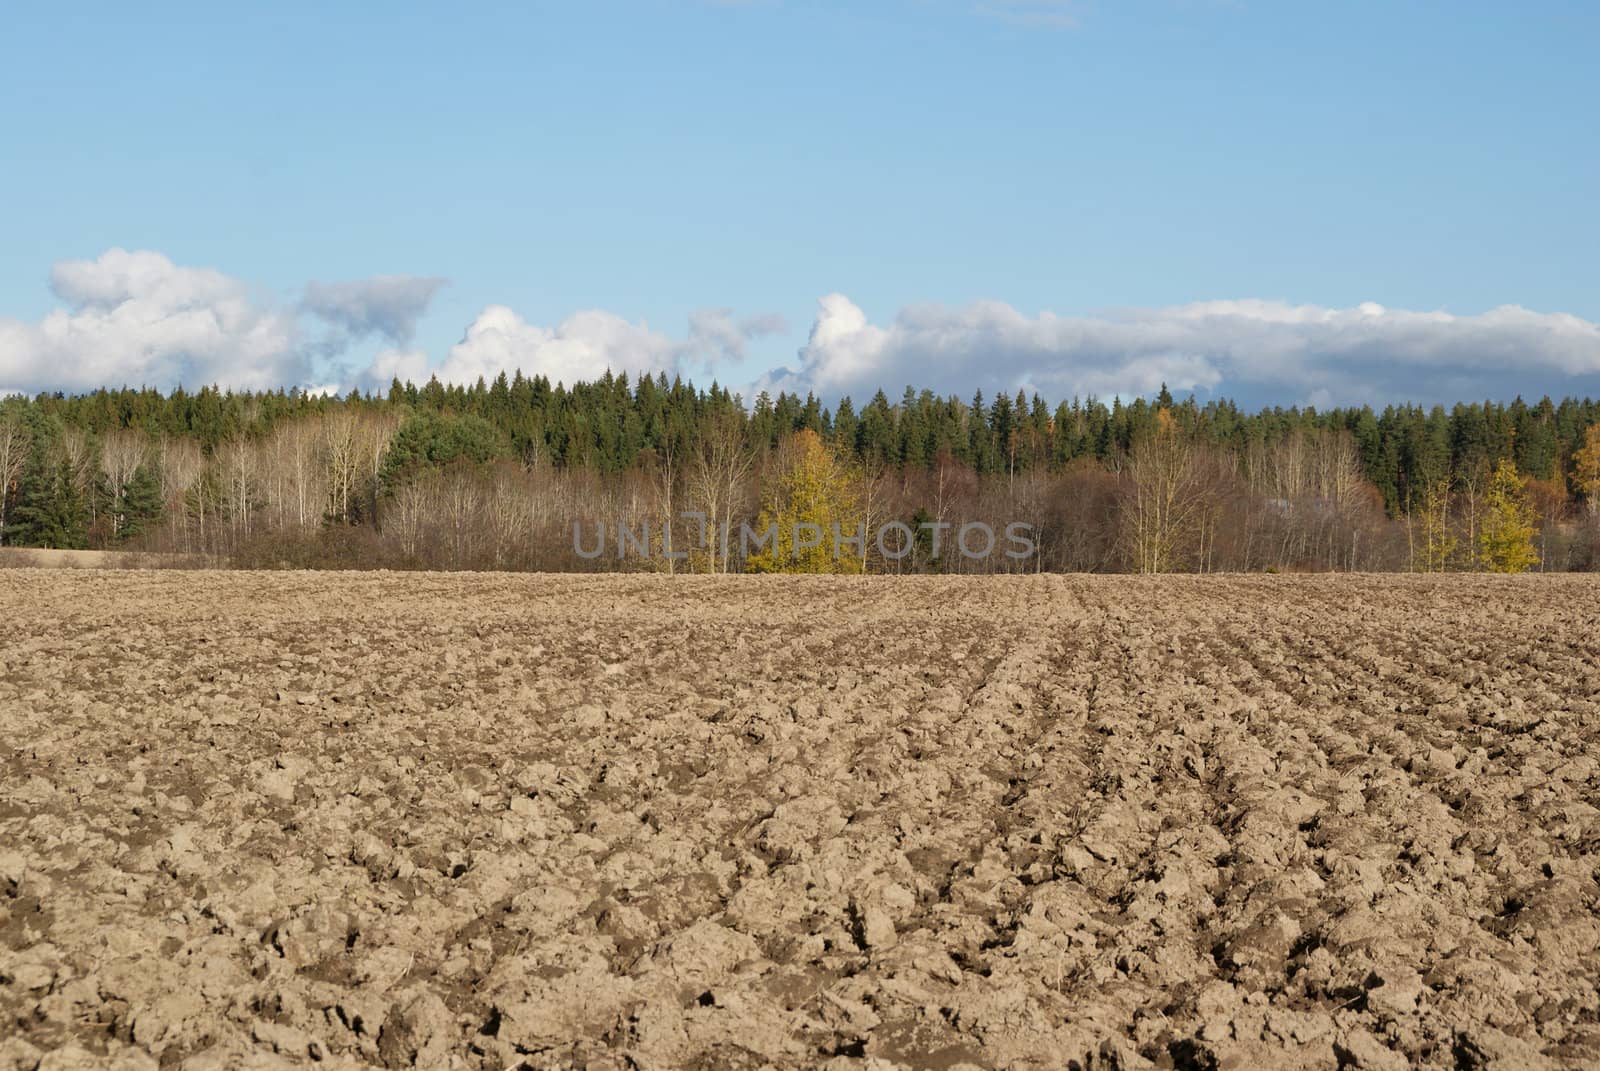 A ploughed field, forest and blue sky with few clouds on a day in October. Photographed in Salo, Finland 2010.